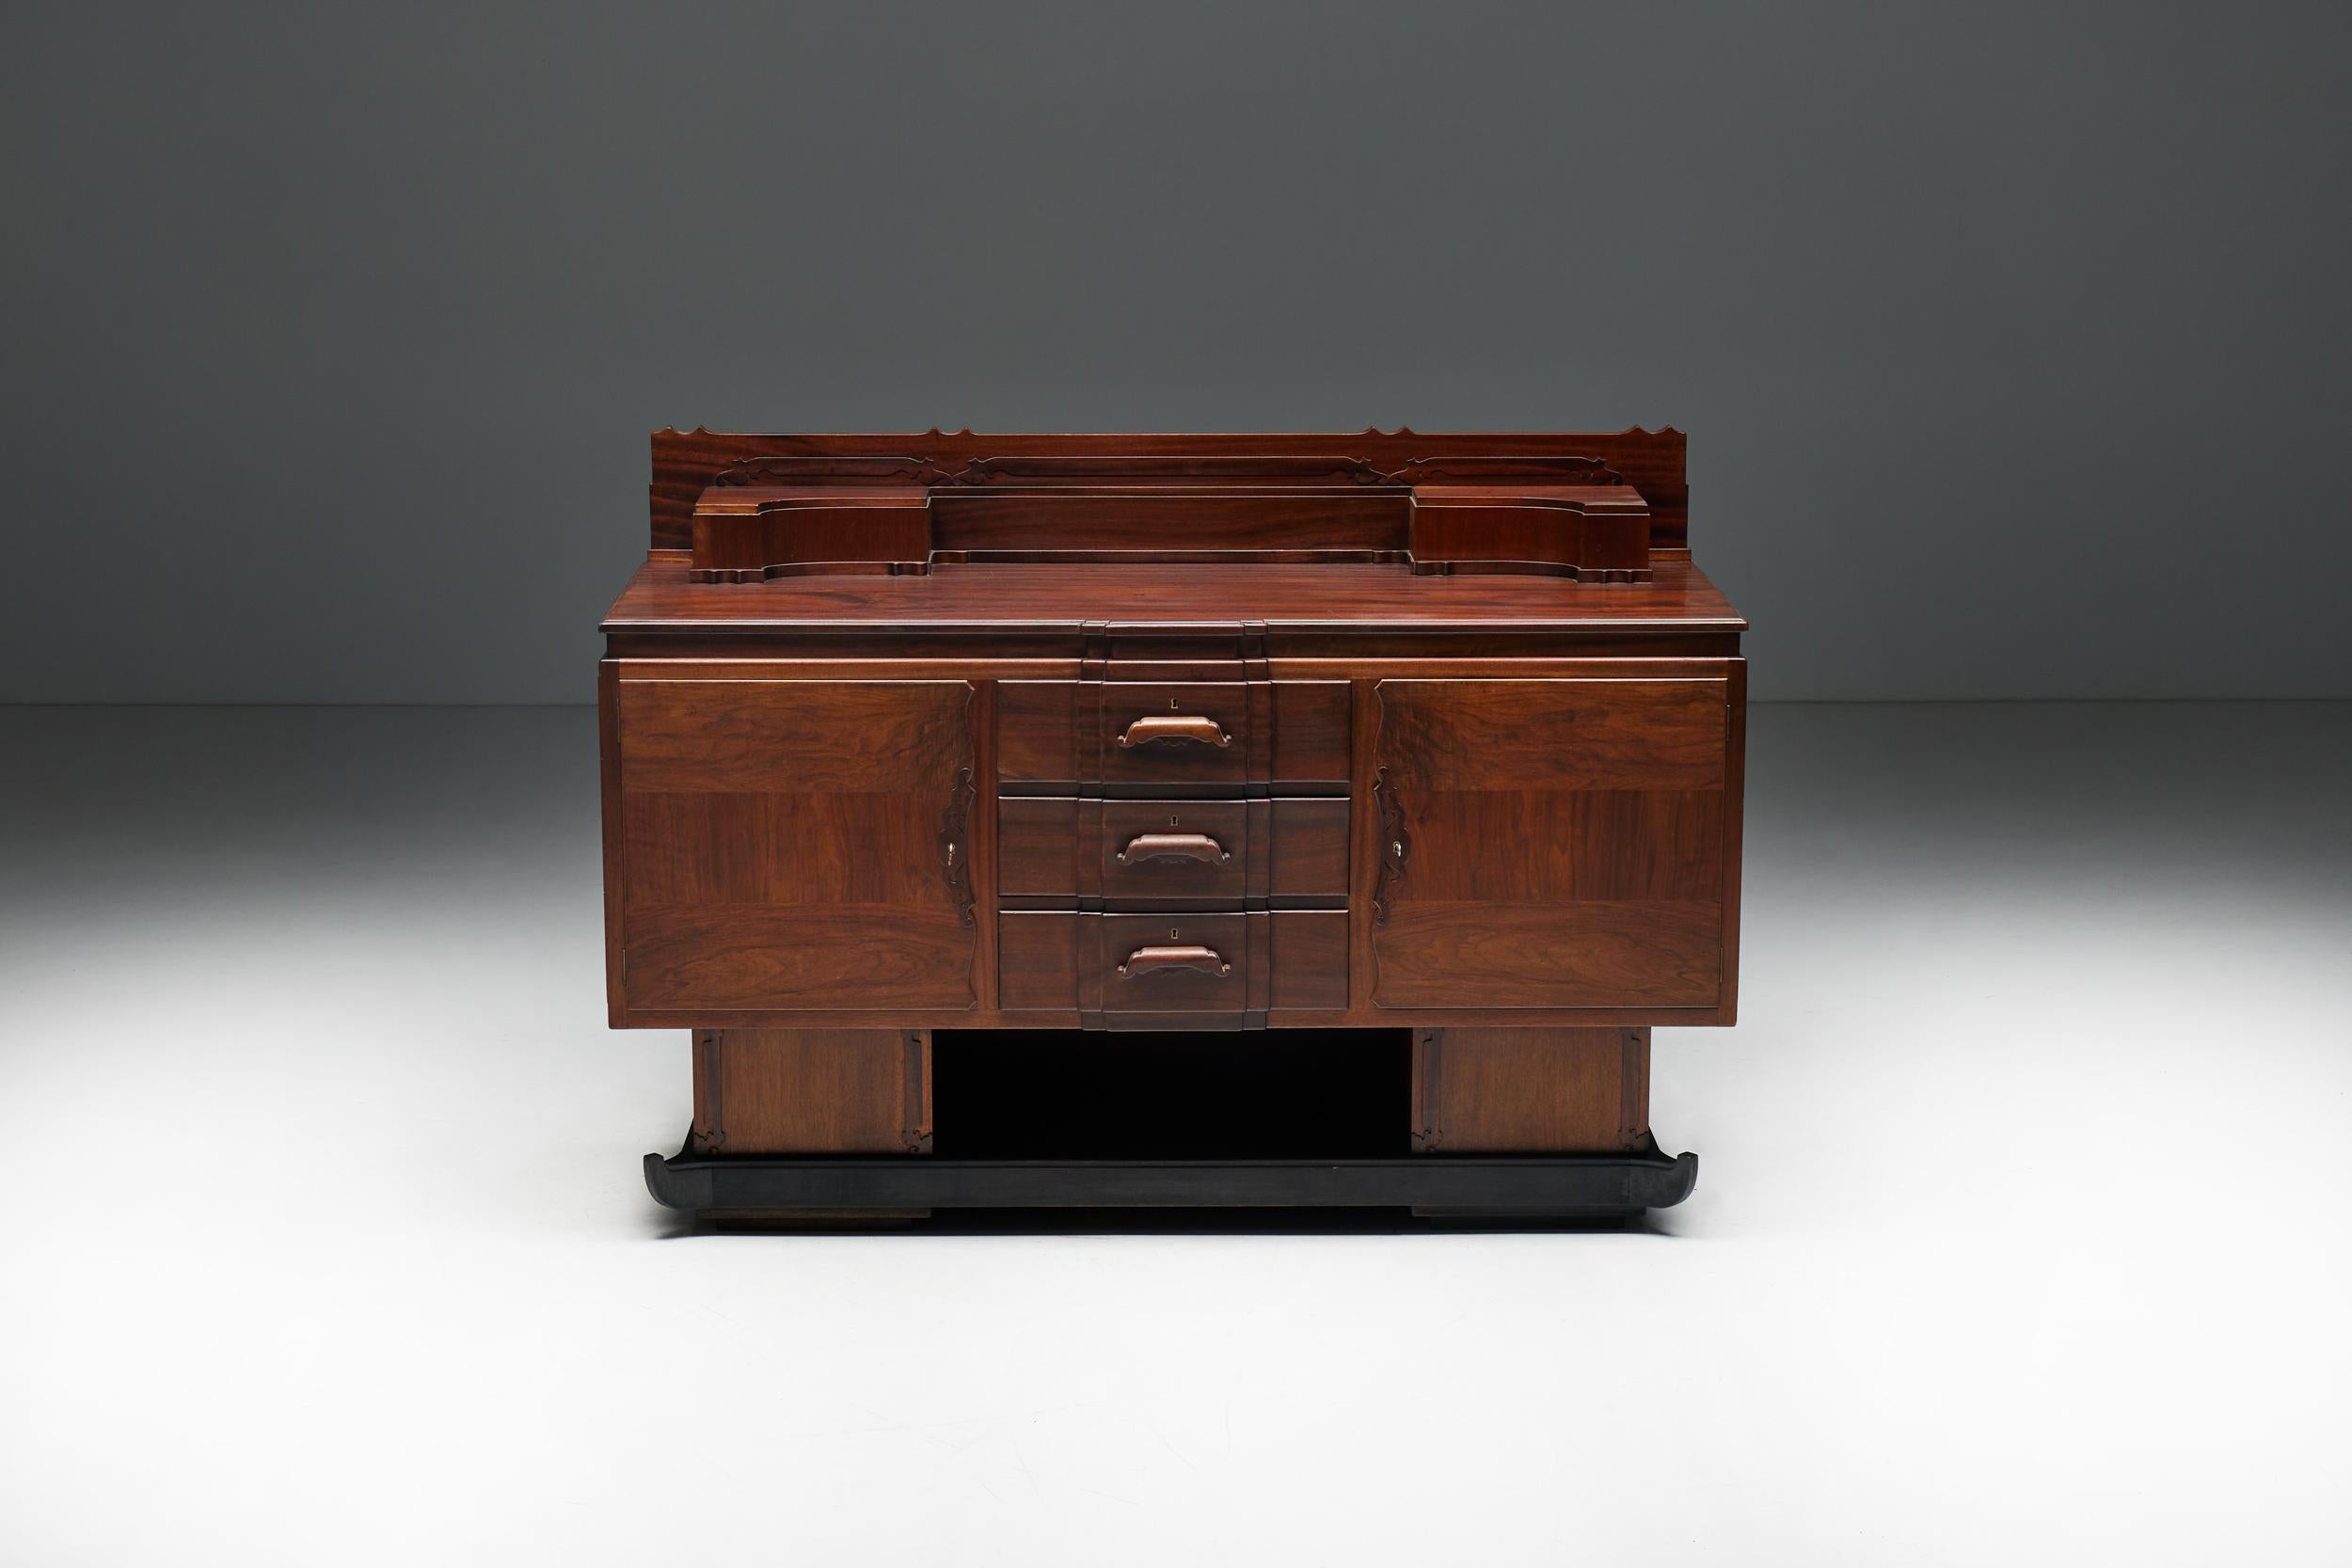 Amsterdam School Credenza, Arts & Crafts; Credenza; Walnut; Mahogany; Oriental inspired; The Netherlands; 1920s;

Walnut and mahogany Amsterdam School credenza, a true testament to the unparalleled craftsmanship and design of the era. This cabinet